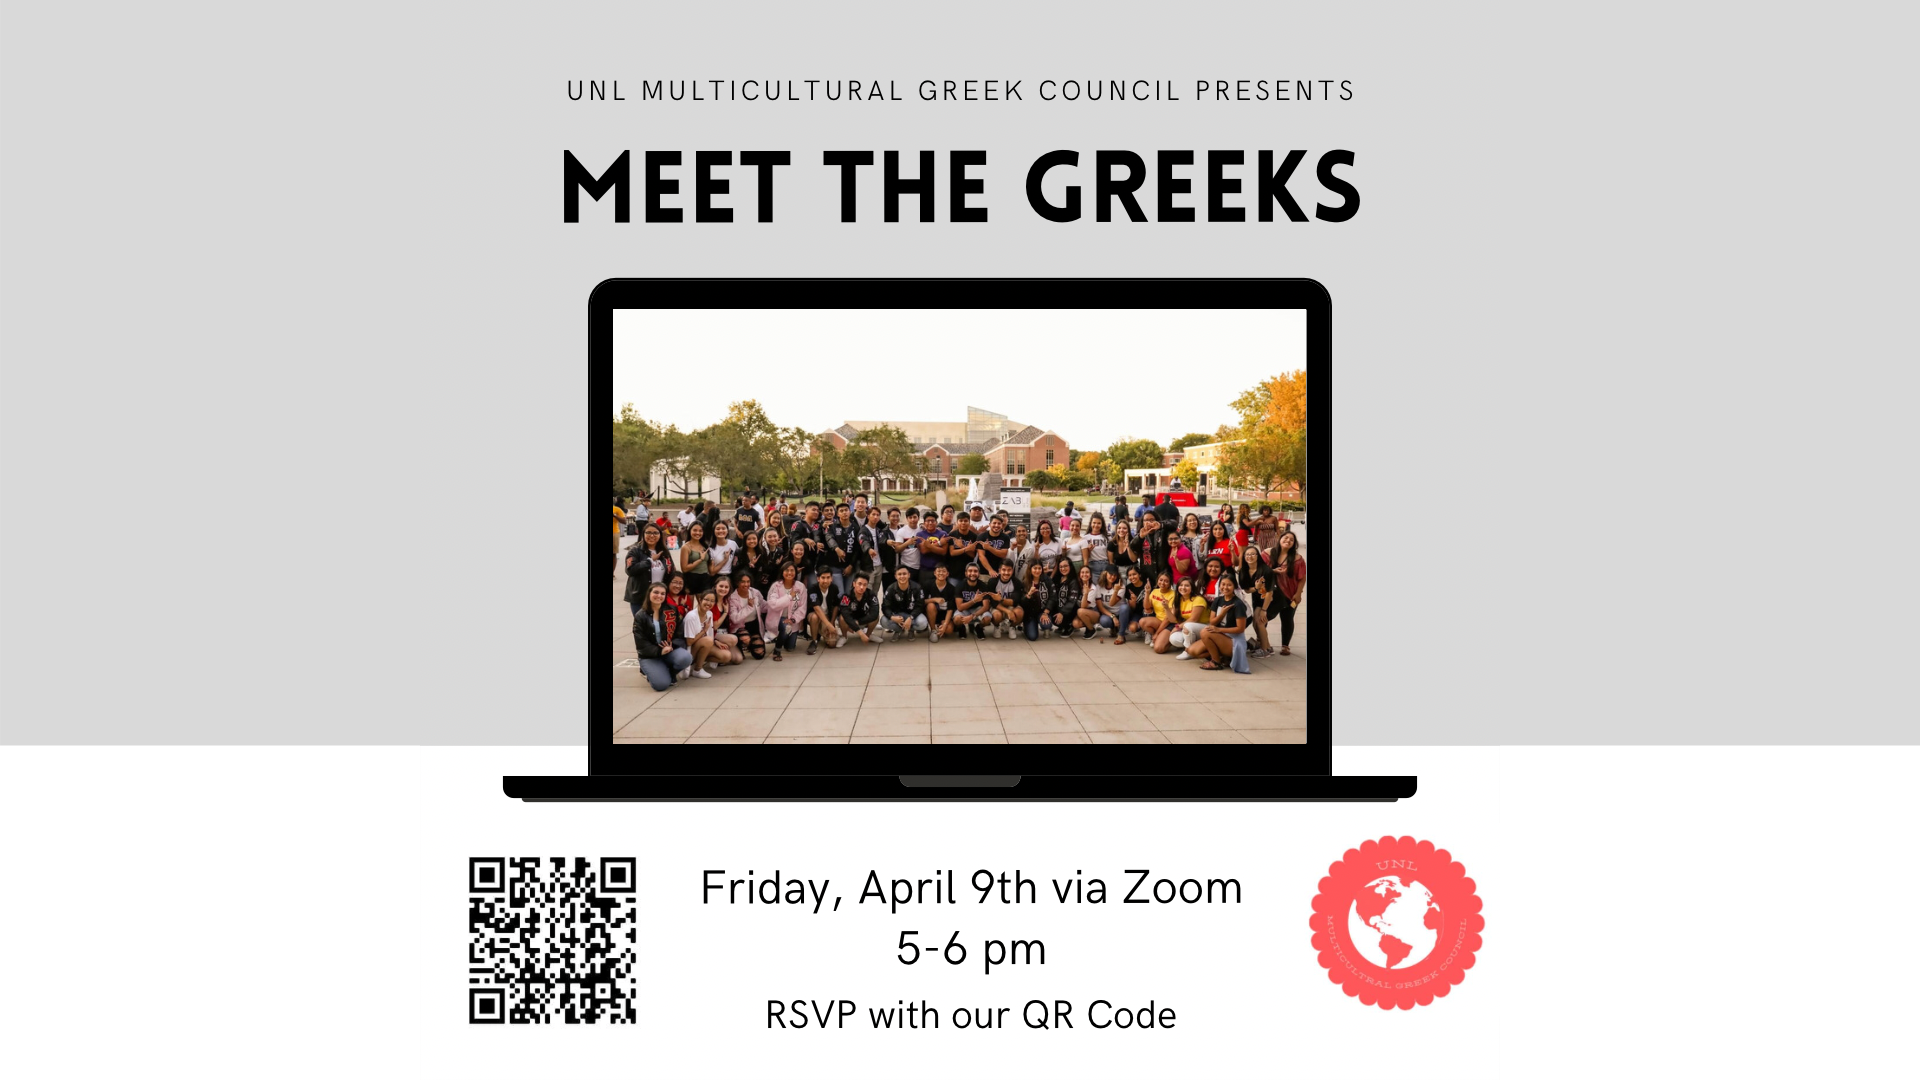 Meet the Greeks will be held on Friday, April 9th via Zoom from 5-6 pm